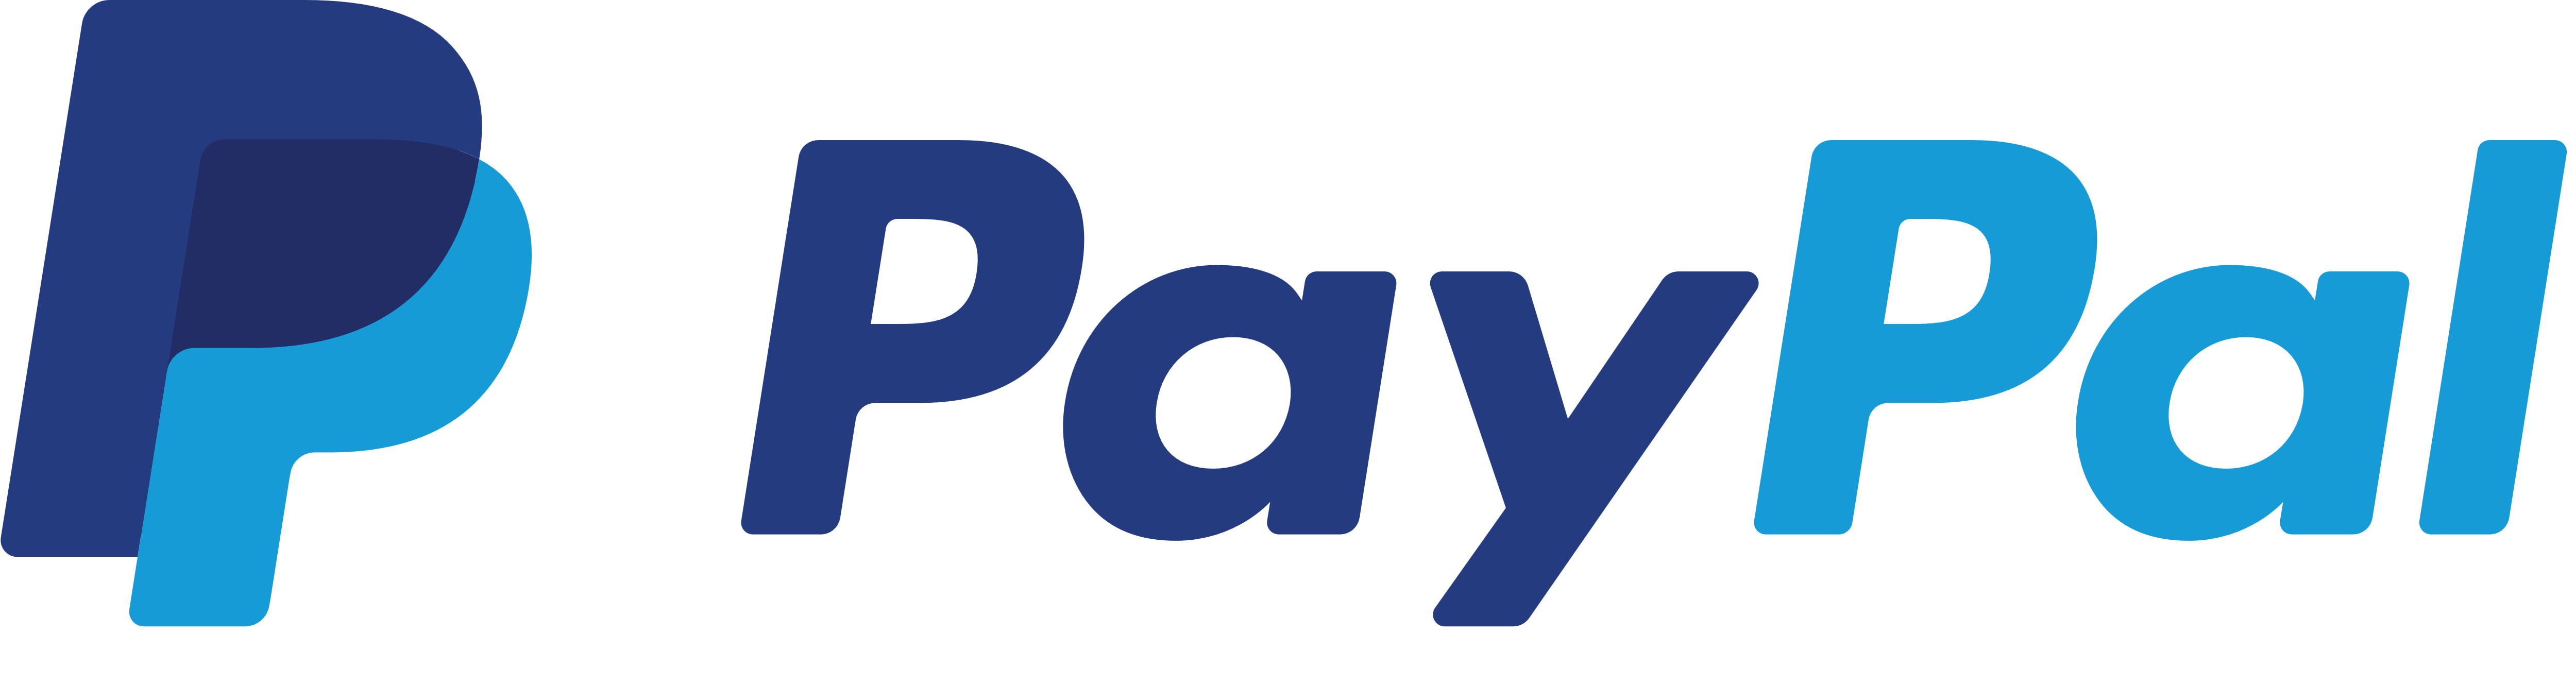 payment company